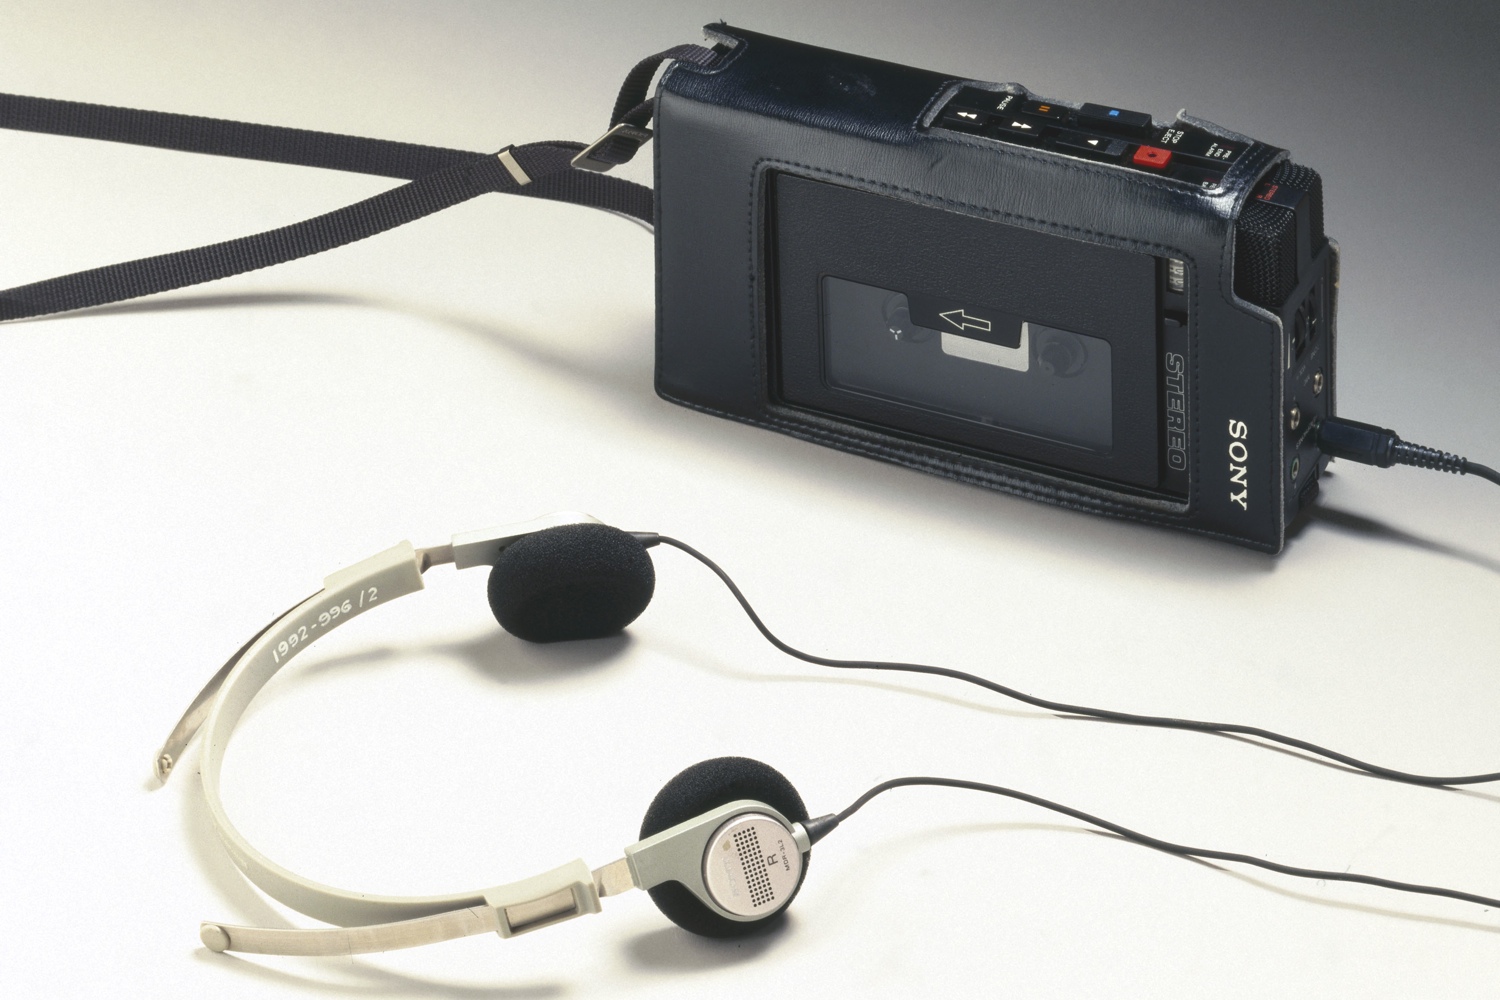 The original 'Walkman', model TCS 300, made by Sony of Japan. The TCS 300 was the first personal stereo cassette recorder manufactured by Sony. (Science &amp; Society Picture Library / Getty Images)